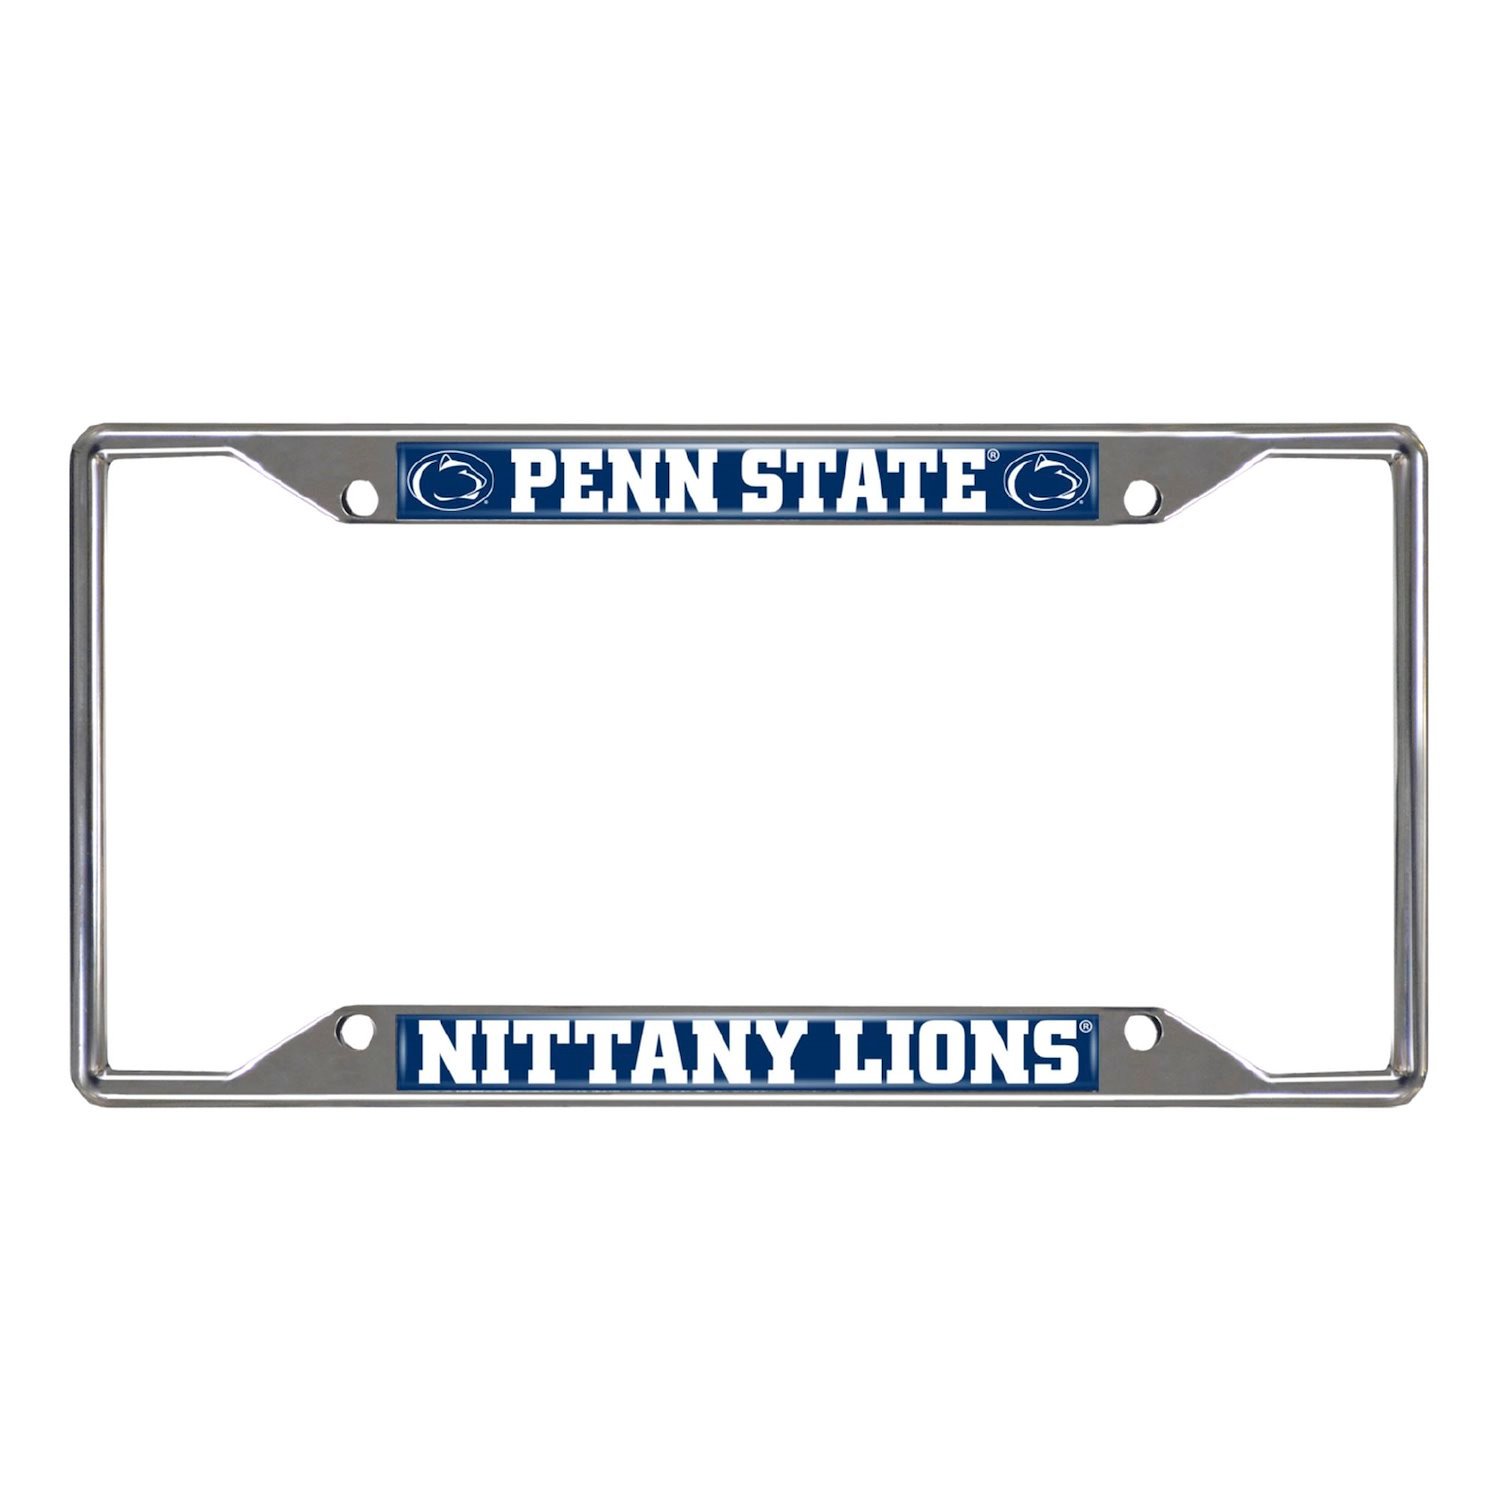 14880 Chrome-Metal License Plate Frame, 6.25 in. x 12.25 in., Penn State